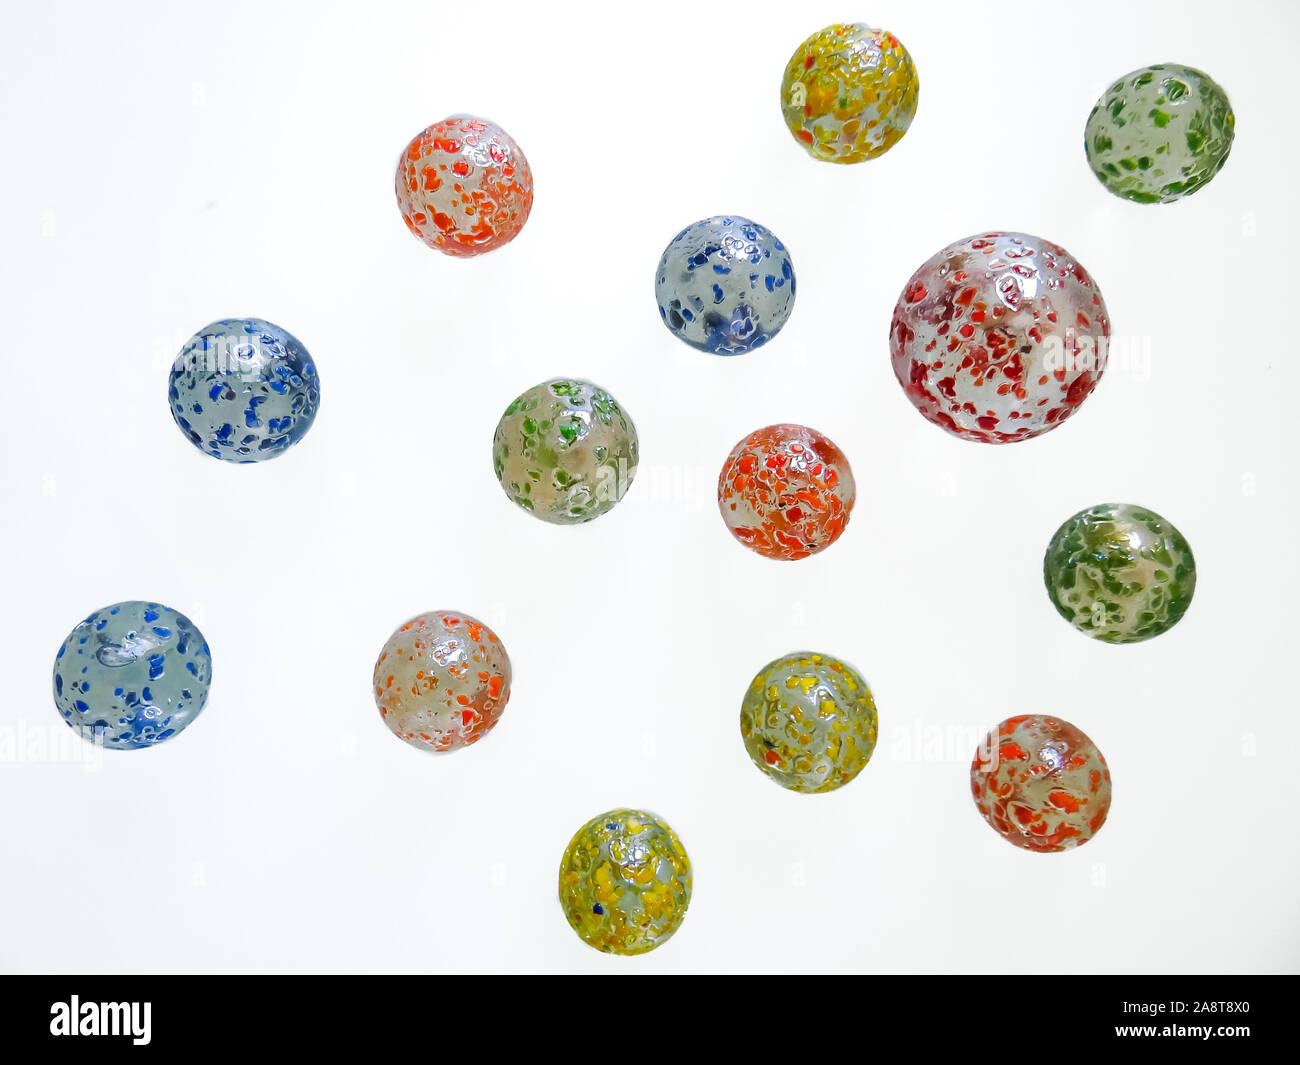 A big green glass marble between yellow, green, blue and red marbles on a  table Stock Photo - Alamy